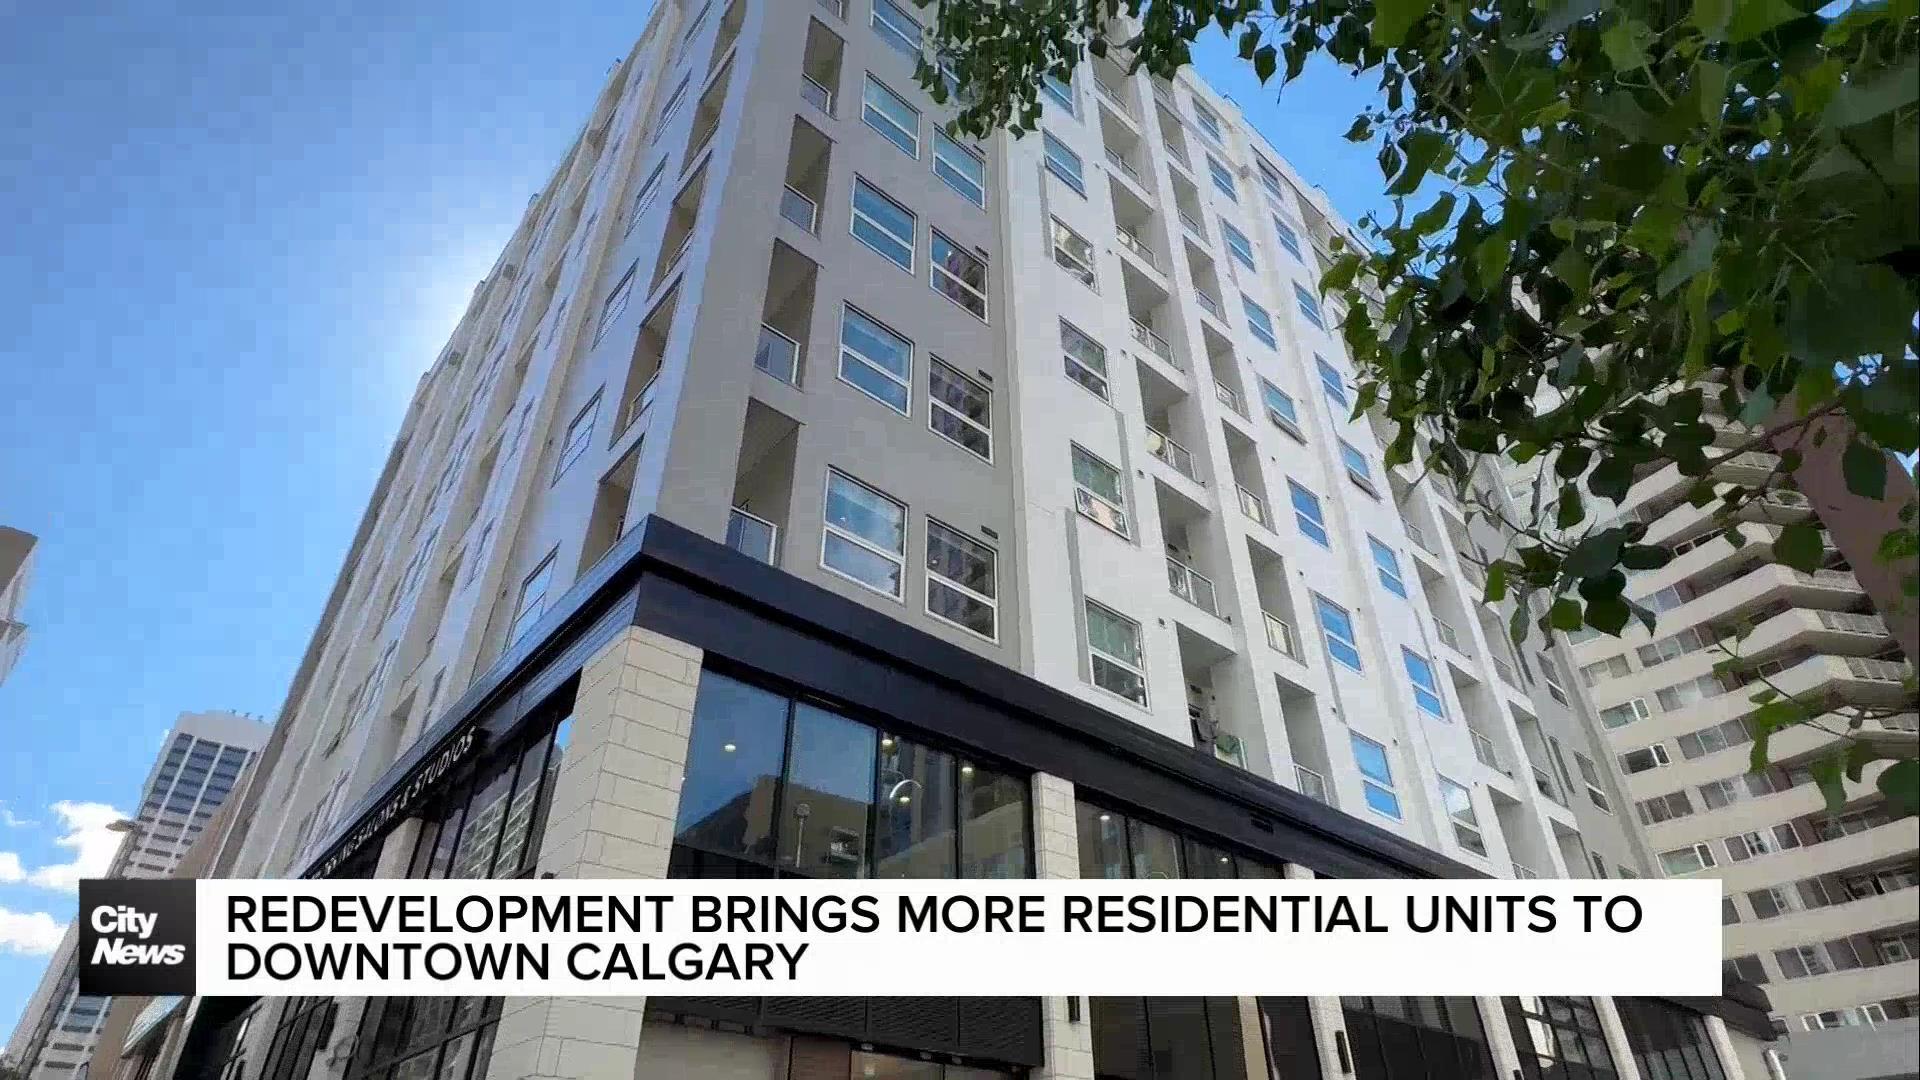 Redevelopment brings more residential units to downtown Calgary